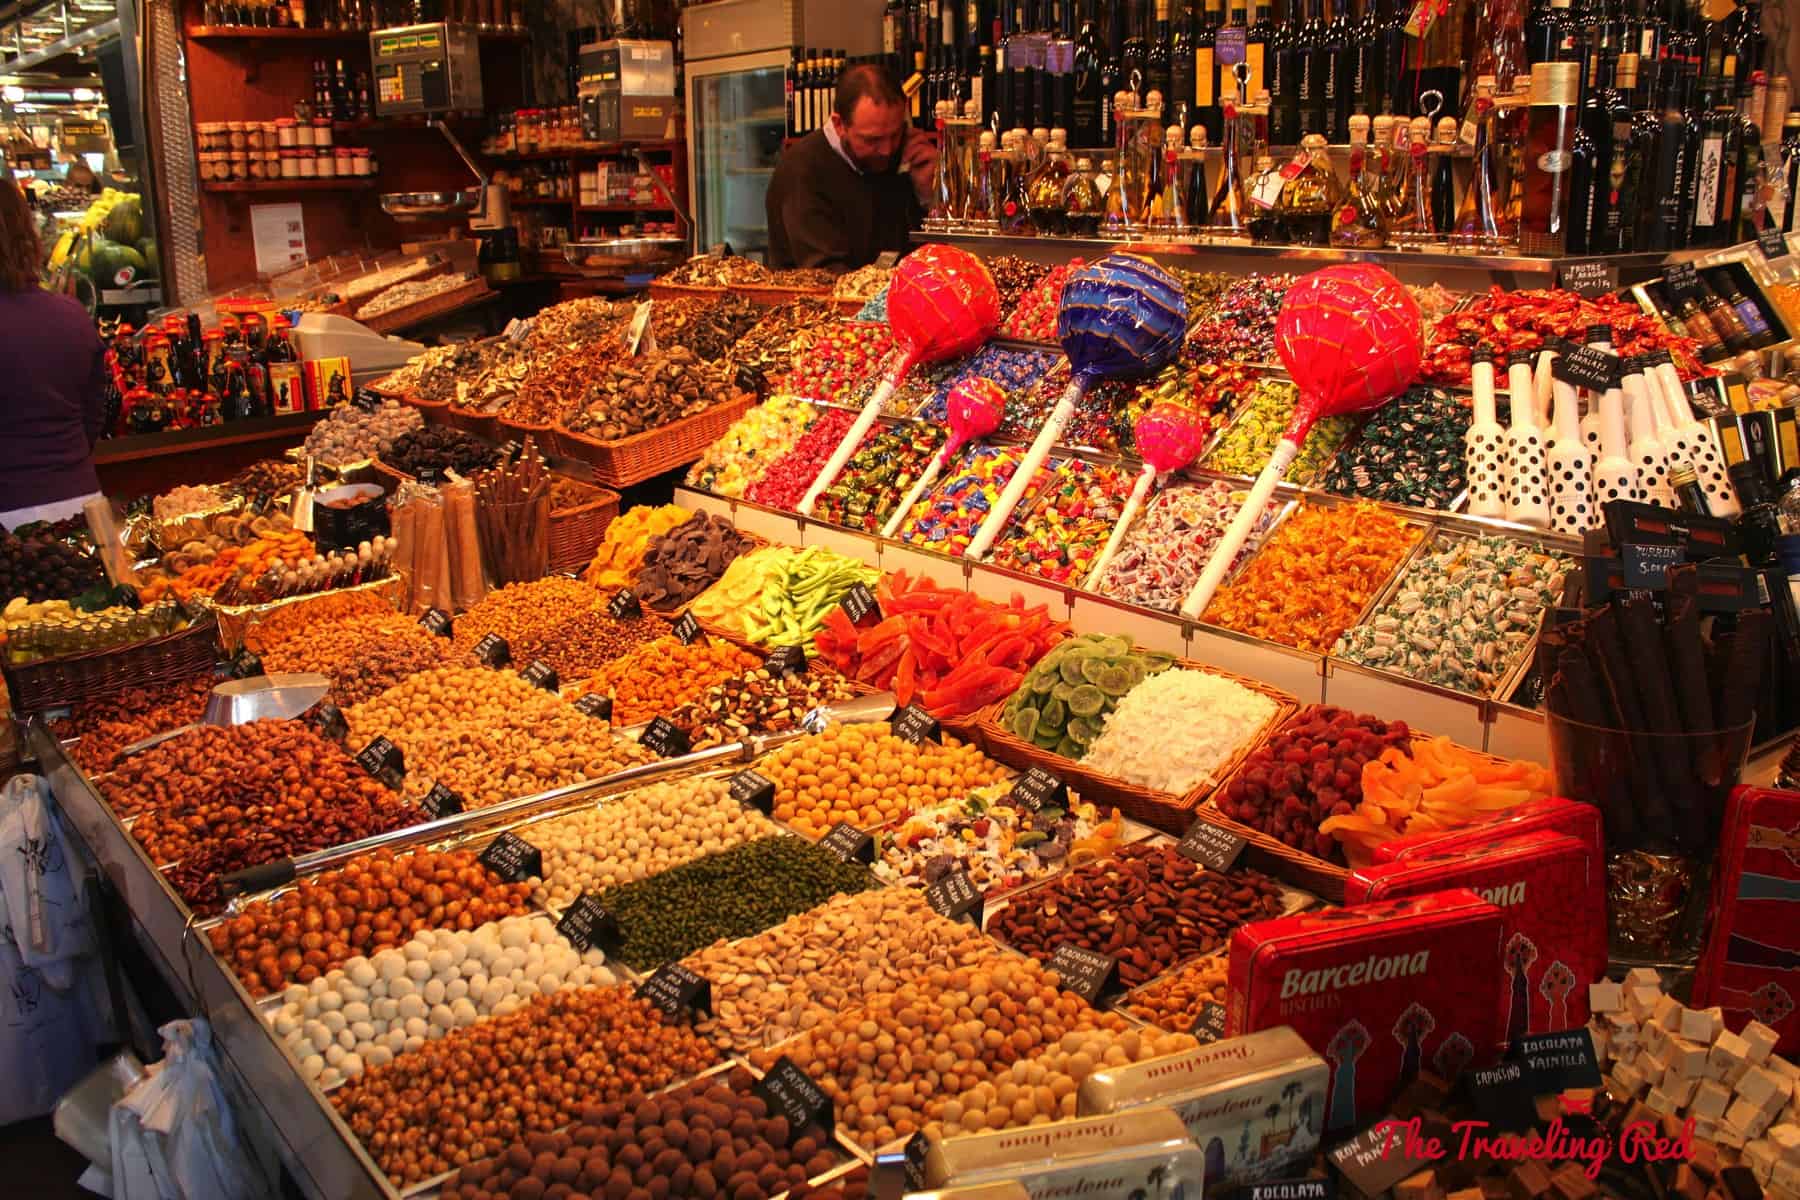 You can't miss the famous La Boqueria, a vibrant fresh market on Las Ramblas in Barcelona, Spain. They sell everything.... fresh fruit, seafood, smoothies, candy, chocolates, etc.